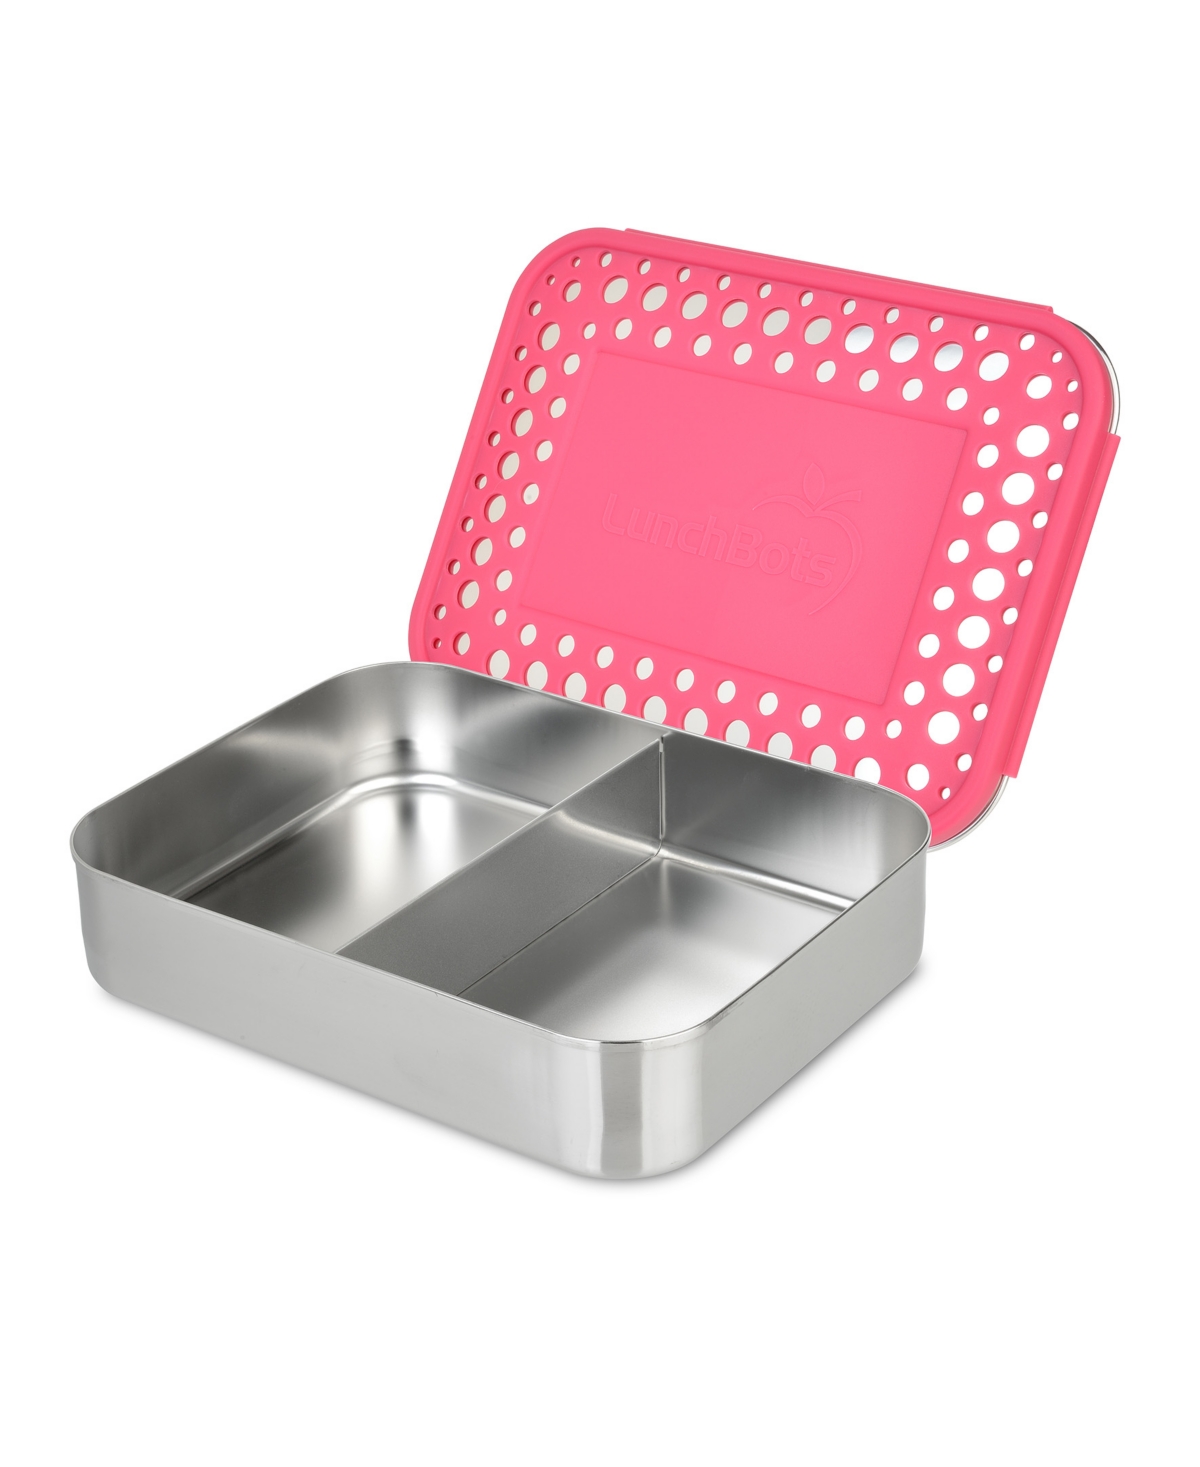 Lunchbots Stainless Steel Bento Lunch Box 2 Sections In Pink Dots